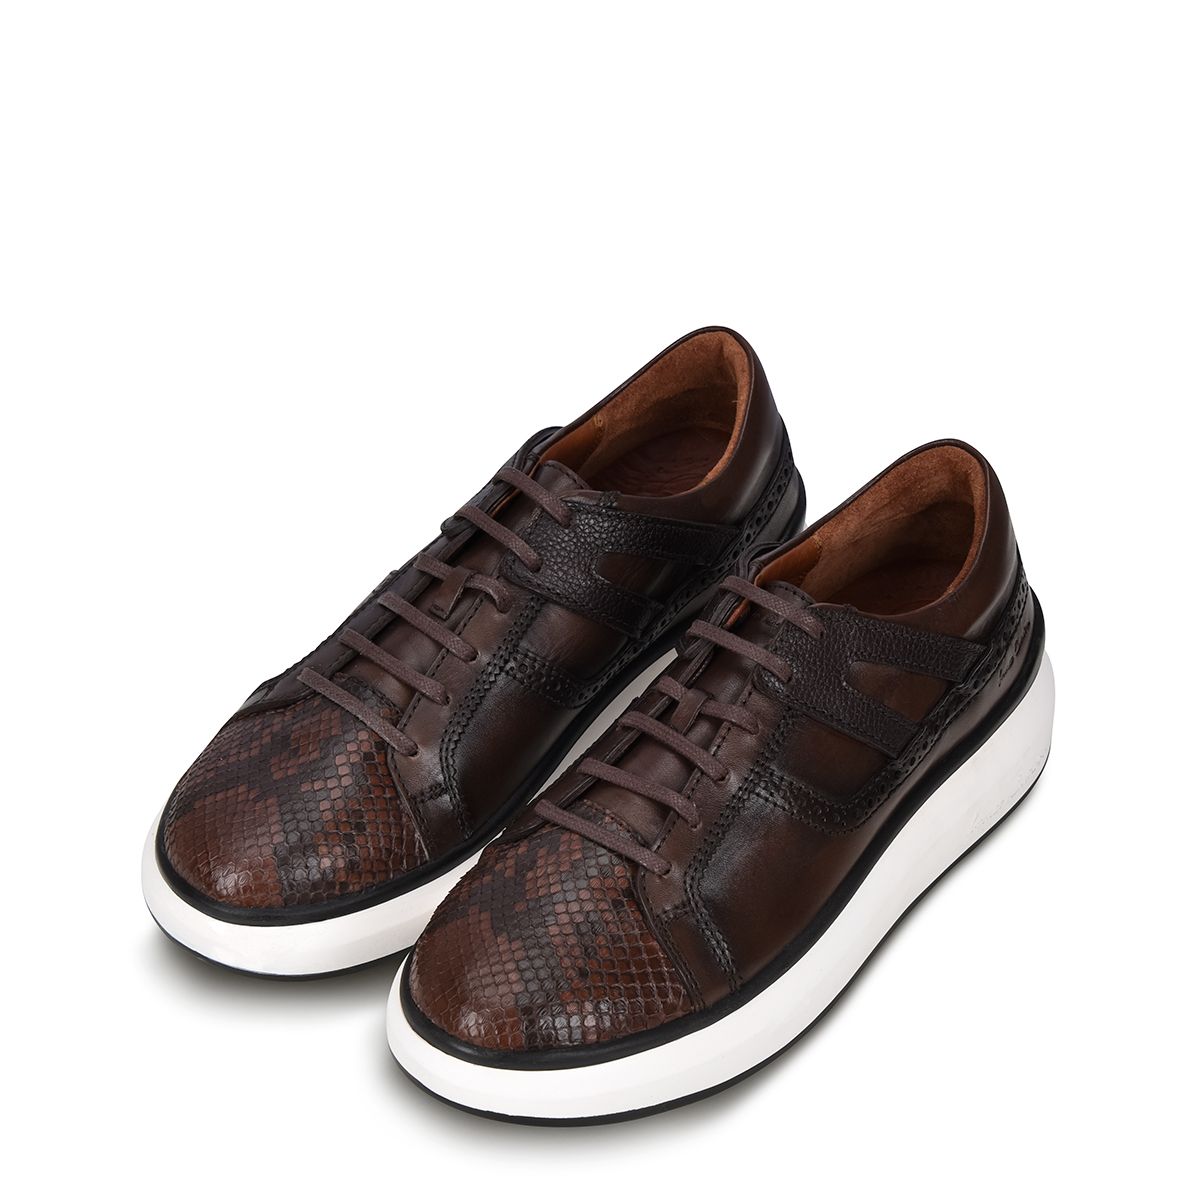 Hand-painted python chocolate leather sneakers